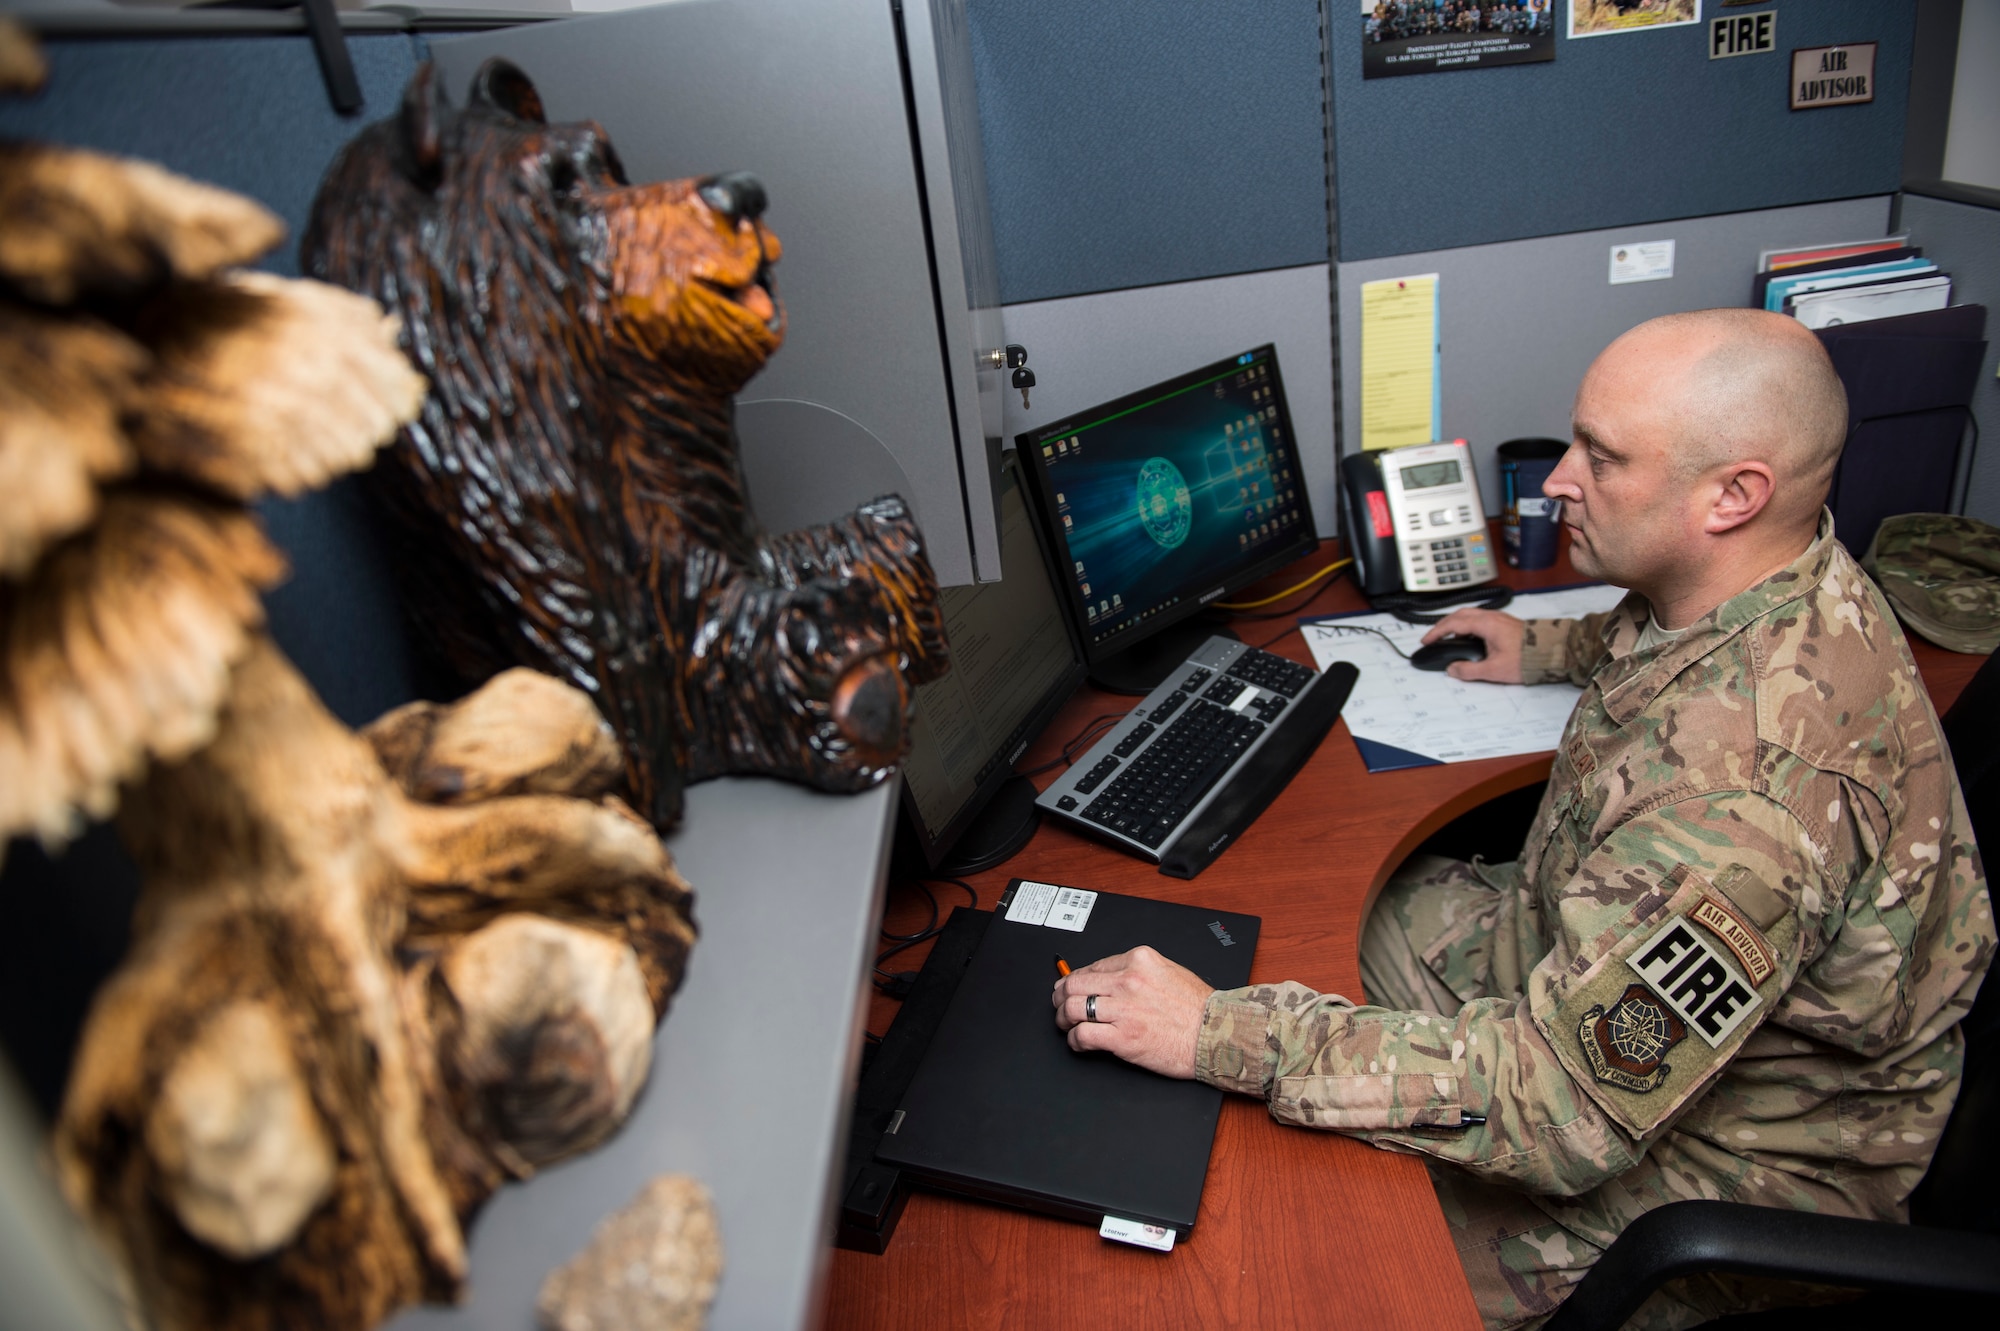 U.S. Air Force Tech. Sgt. Scott Herbert, 818th Mobility Support Advisory Squadron air advisor, answers emails at his office which is decorated with some of his chainsaw carvings April 1, 2020, Joint Base McGuire-Dix-Lakehurst, New Jersey. Herbert says that carving is his way to find peace and calm during his busy family, work, and church life. (U.S. Air Force photo by Staff Sgt. Sarah Brice)